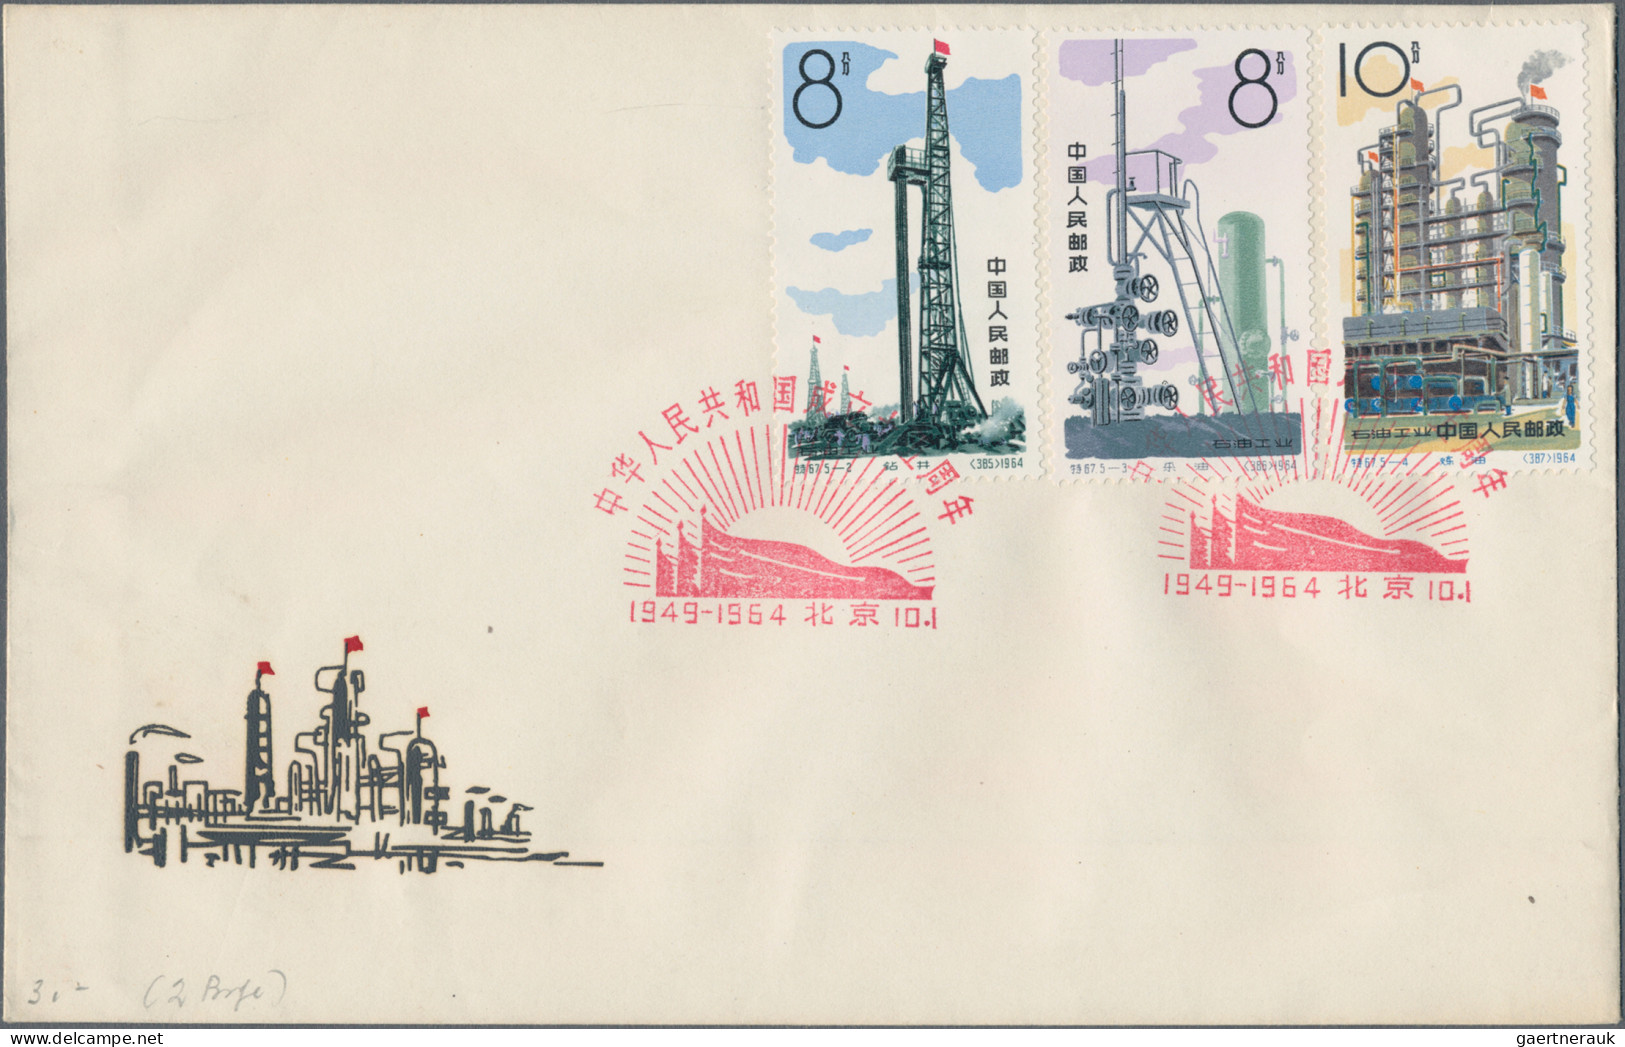 China (PRC): 1964, Petroleum Industry (S67), two complete sets of five on four o